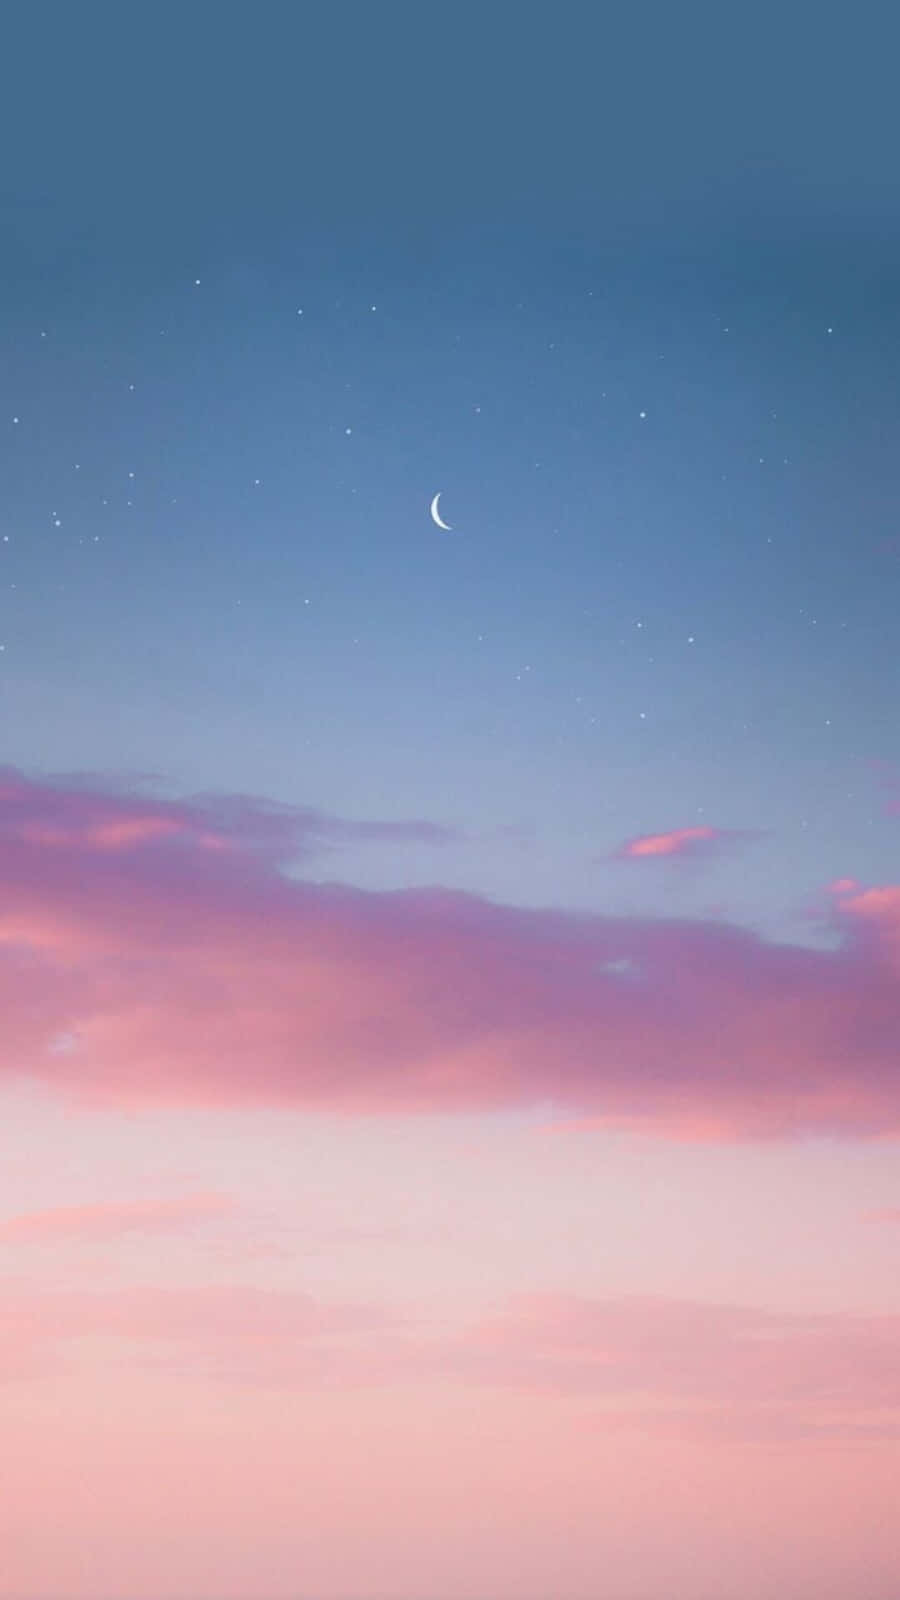 A beautiful landscape of pink and blue hues Wallpaper